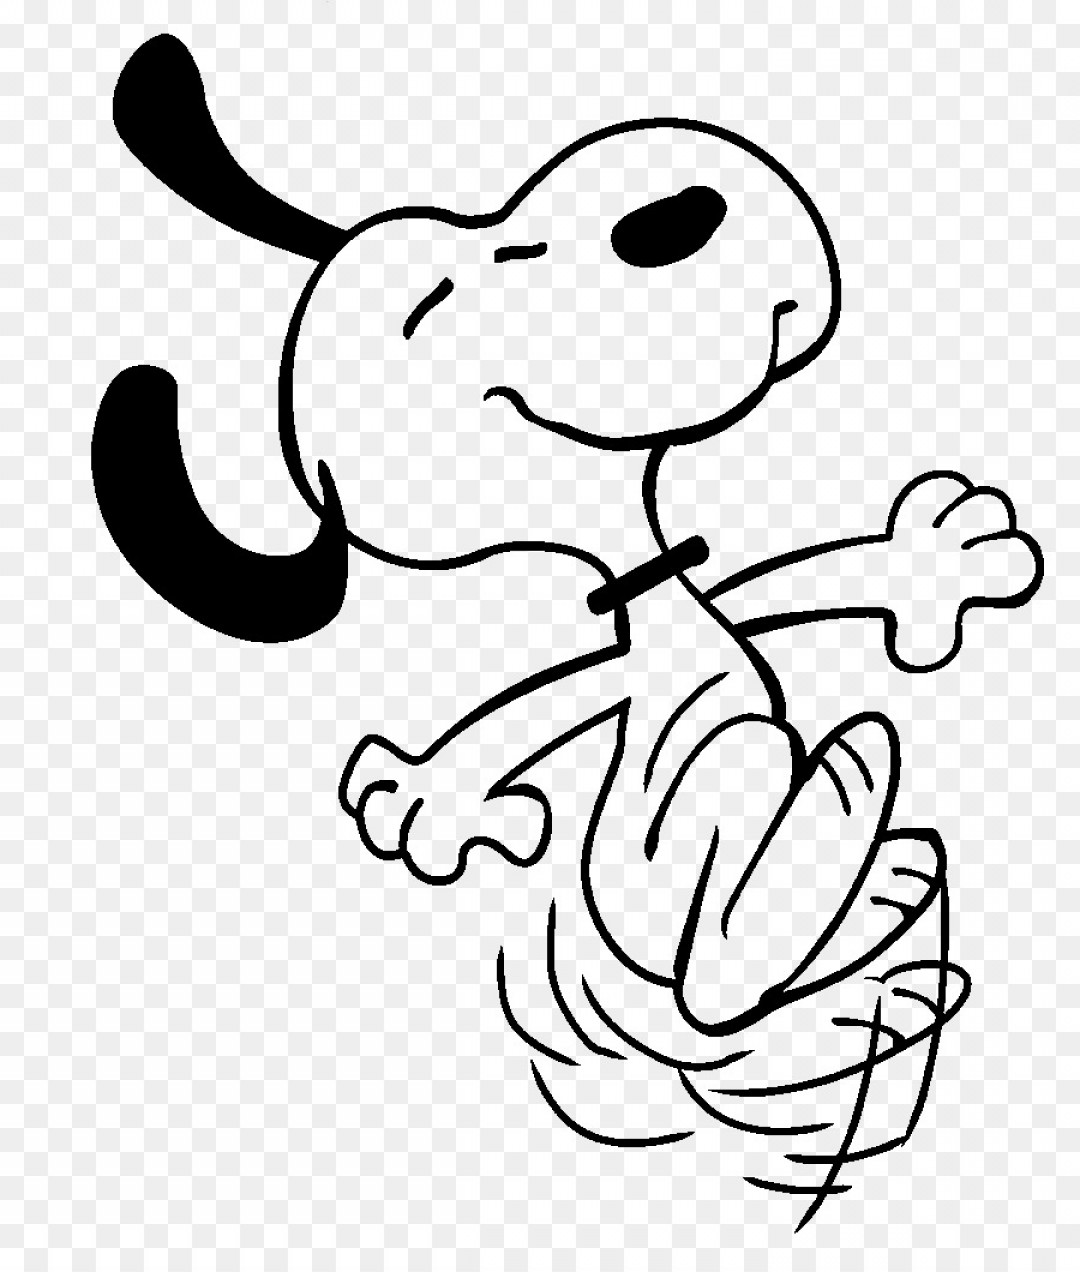 The best free Snoopy vector images. Download from 52 free vectors of